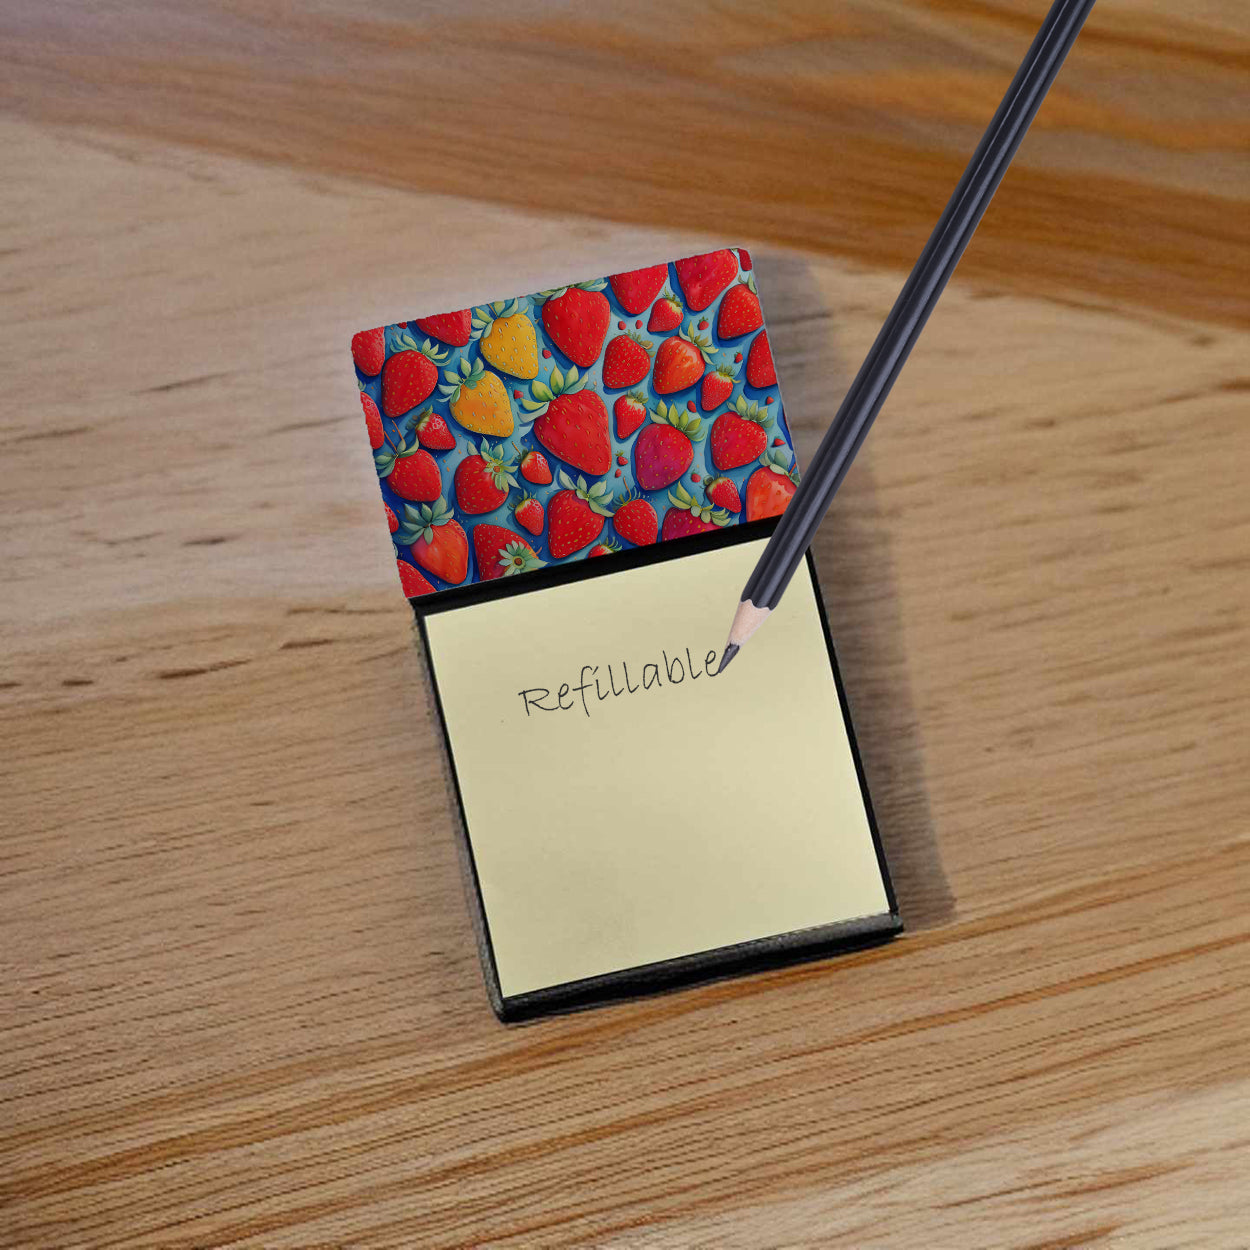 Buy this Colorful Strawberries Sticky Note Holder